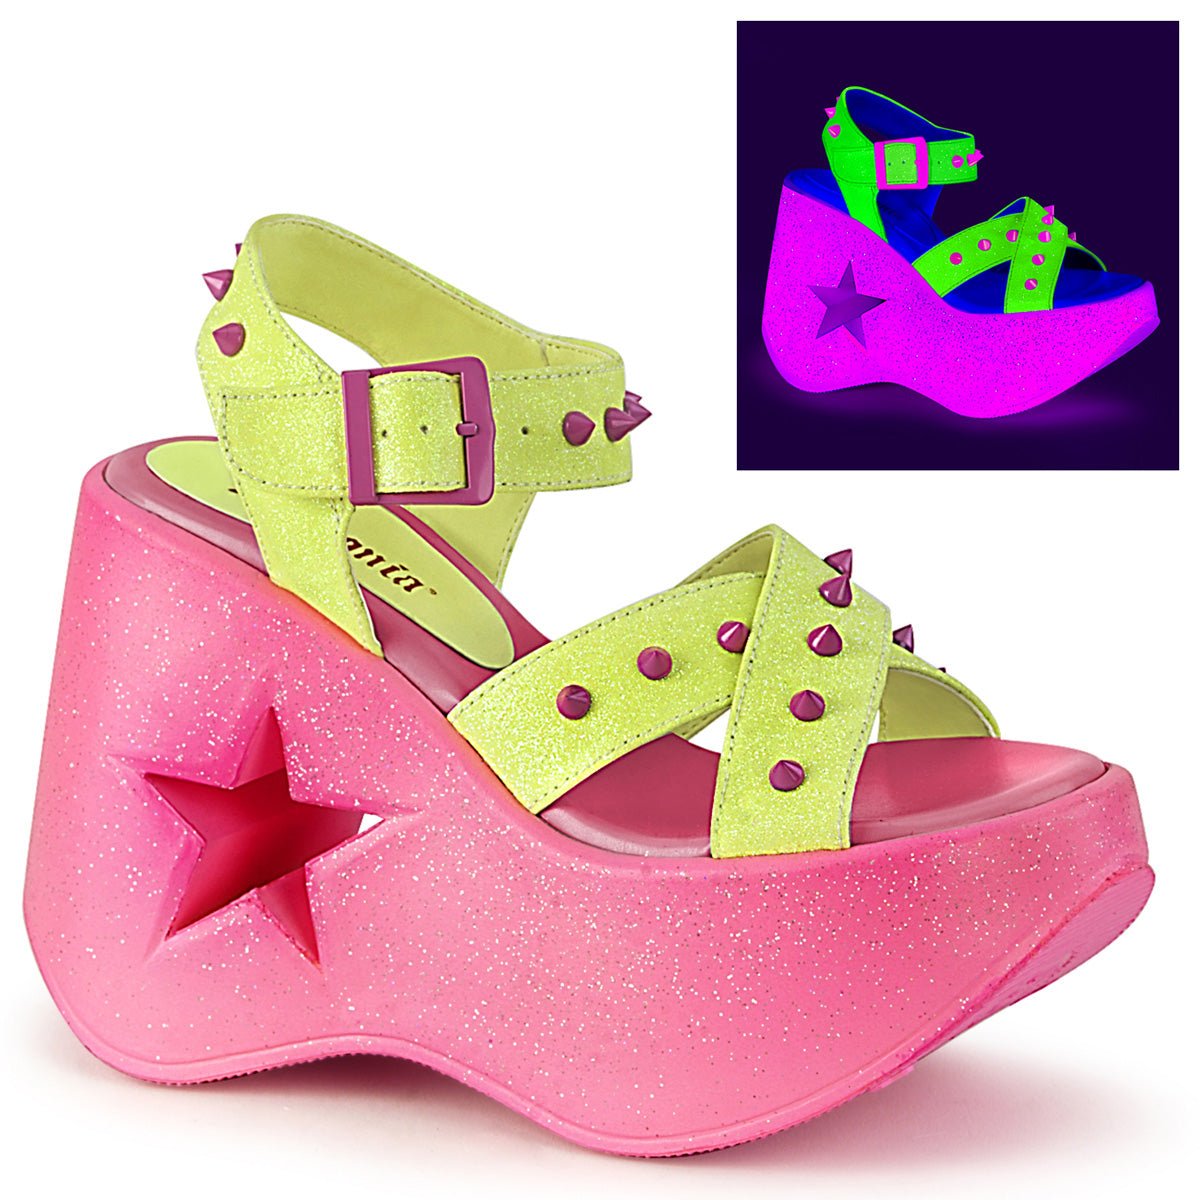 Clearance DemoniaCult Dynamite 02 Yellow/Pink Glitter Size 5UK/8USA - From Clearance Sold By Alternative Footwear